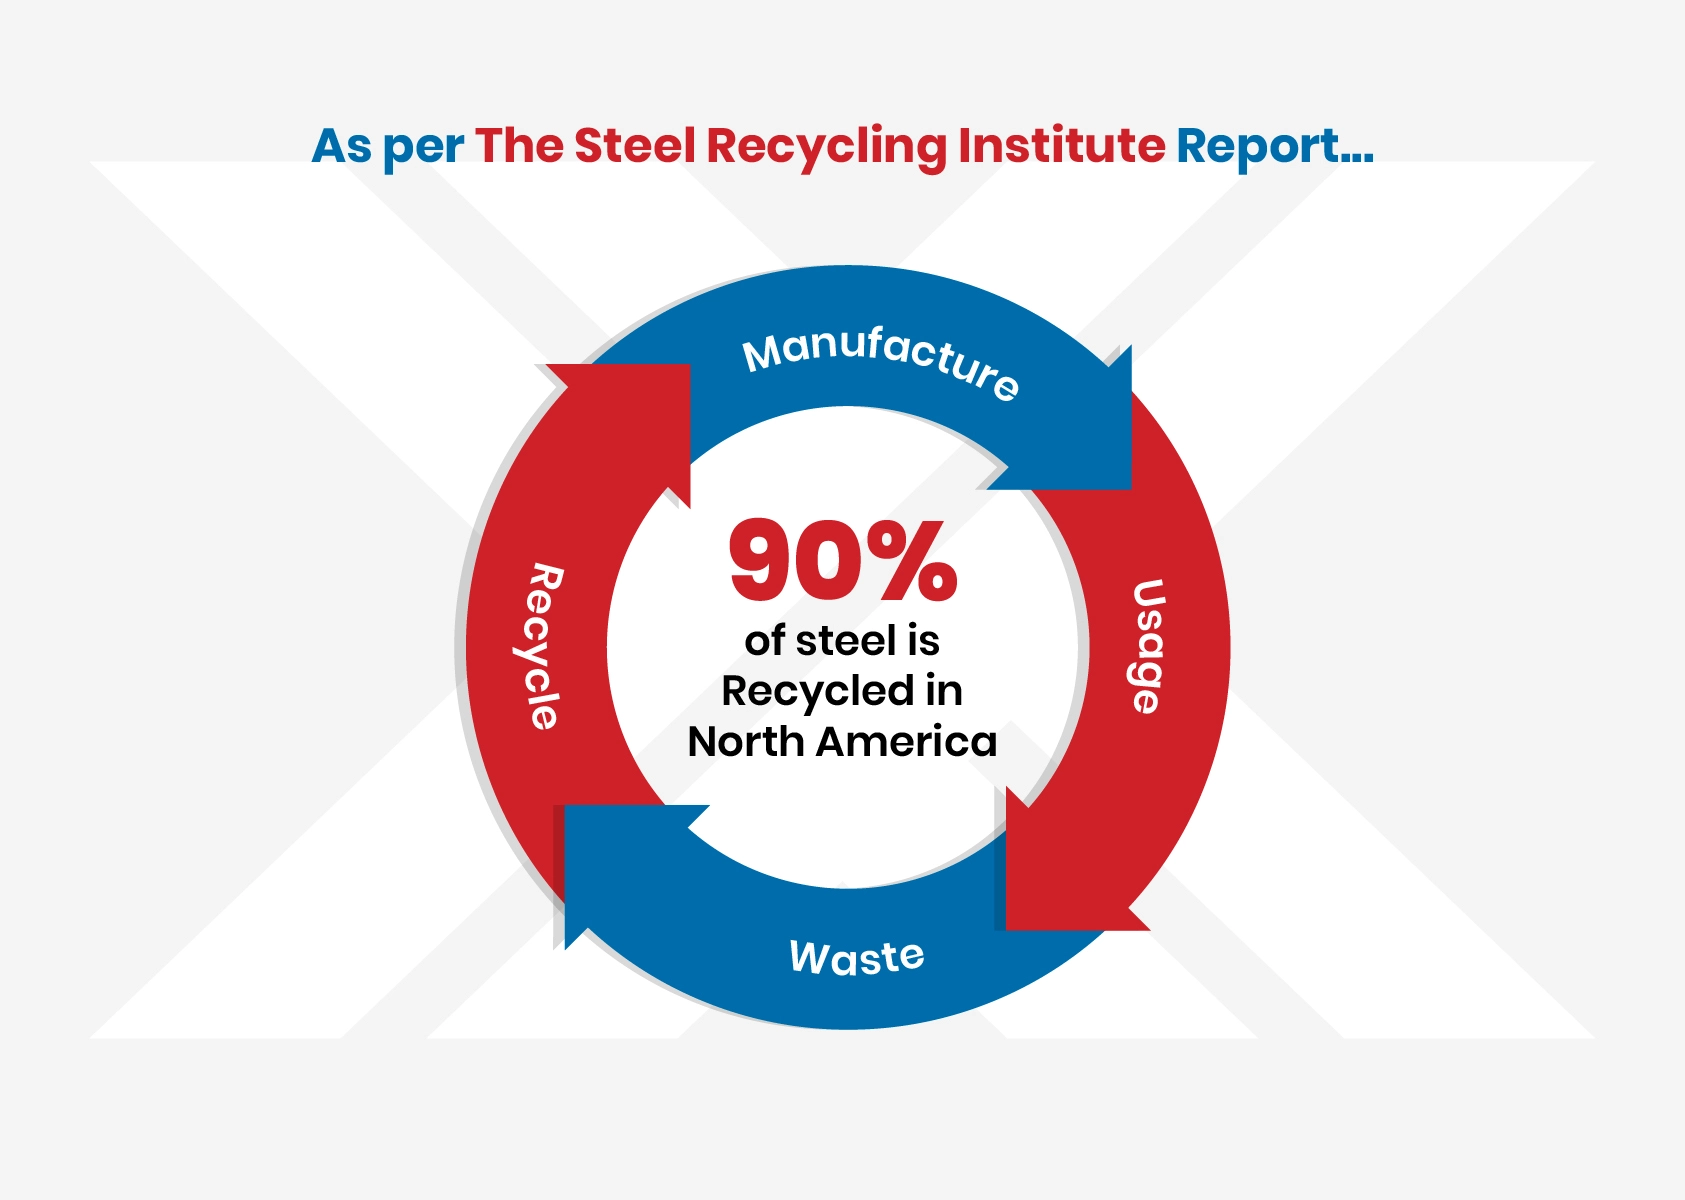  The Steel Recycling Institute reports that over 90% of steel is recycled in North America, making it one of the most recycled materials on Earth.